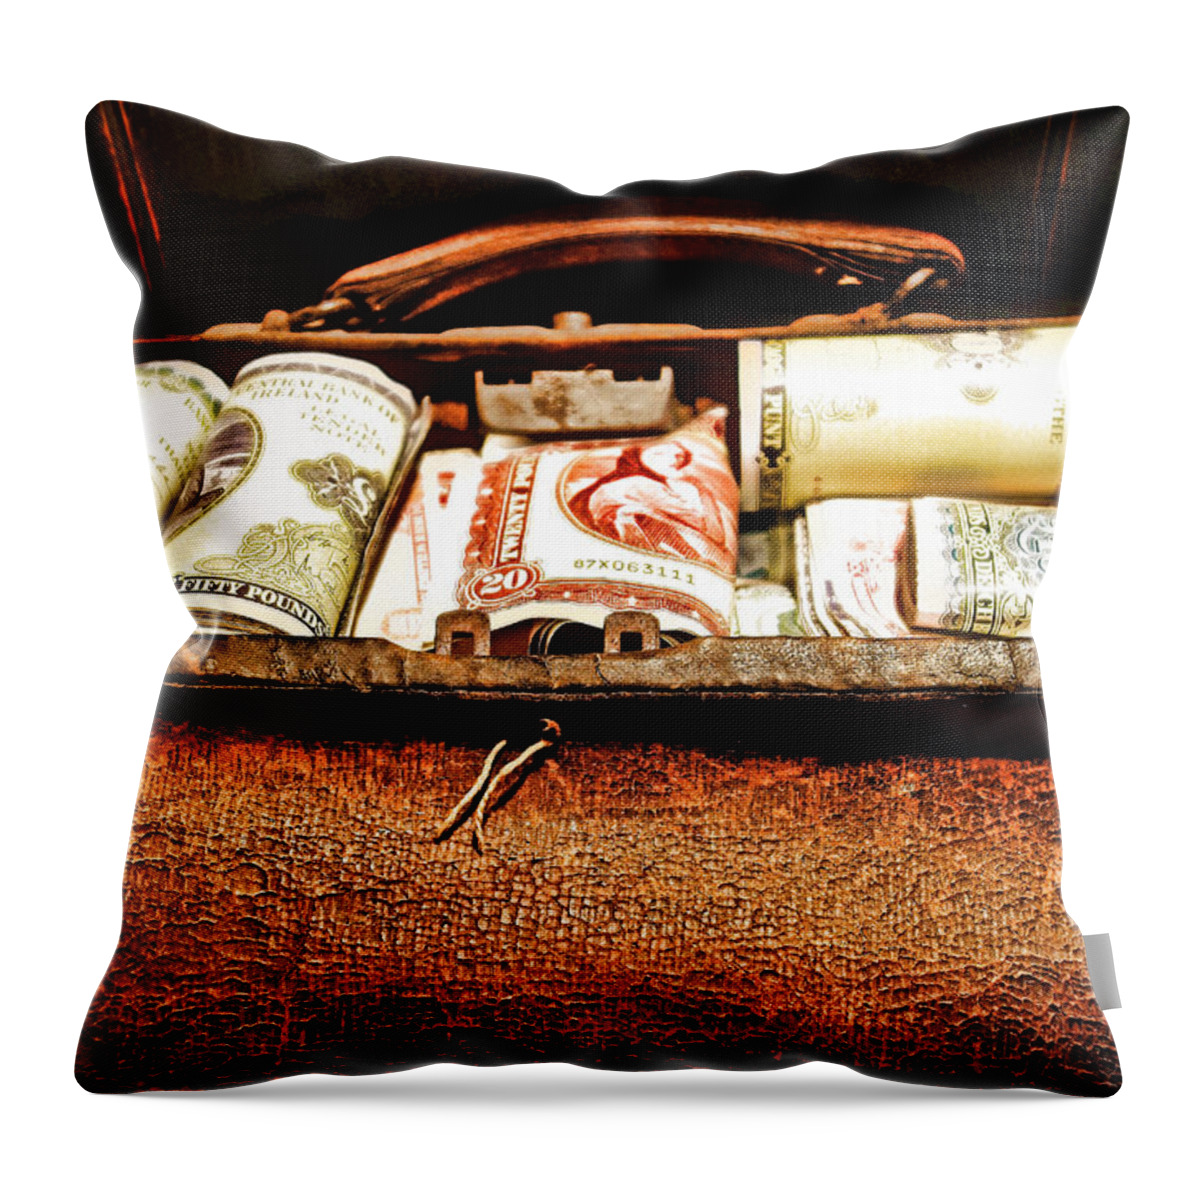 Old Leather Bag Filled With Money Throw Pillow featuring the photograph Money Bag by Joan Reese